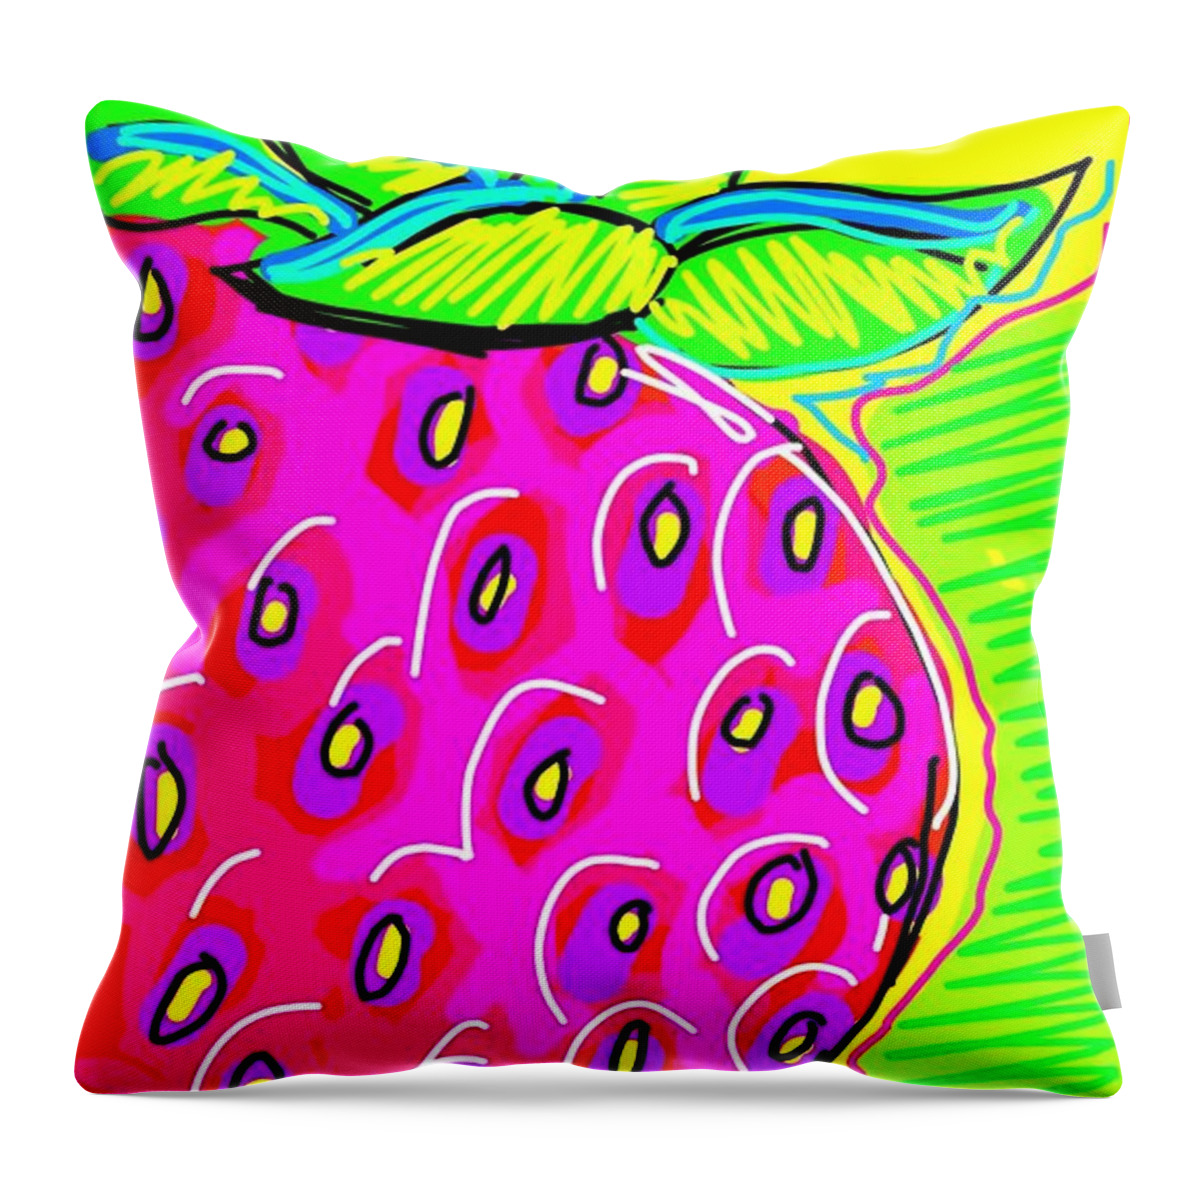 Berry Throw Pillow featuring the digital art Berry Good by Madeline Dillner